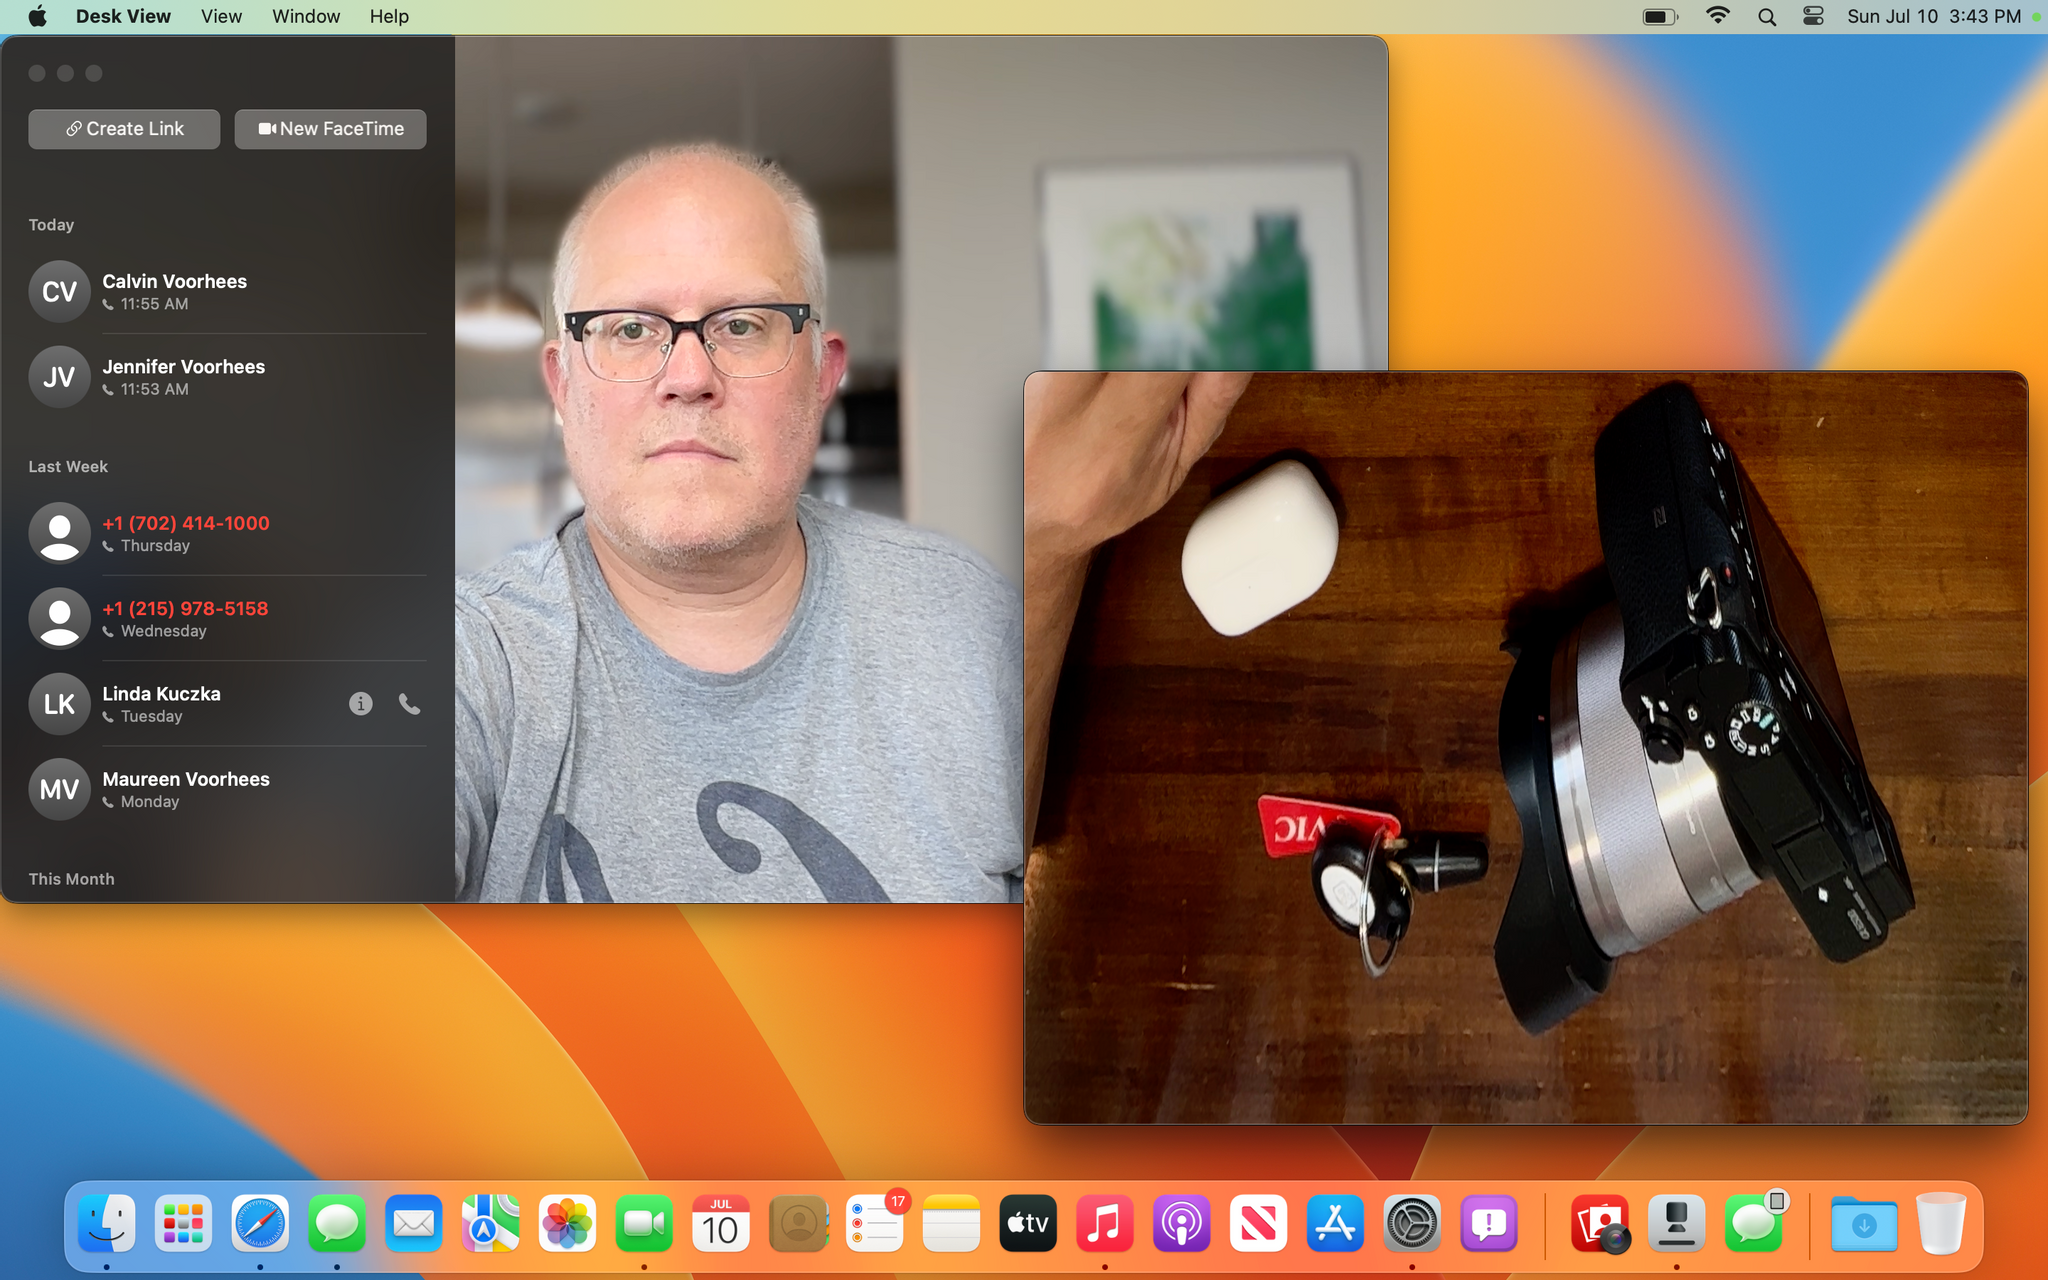 Using Desk View with FaceTime.